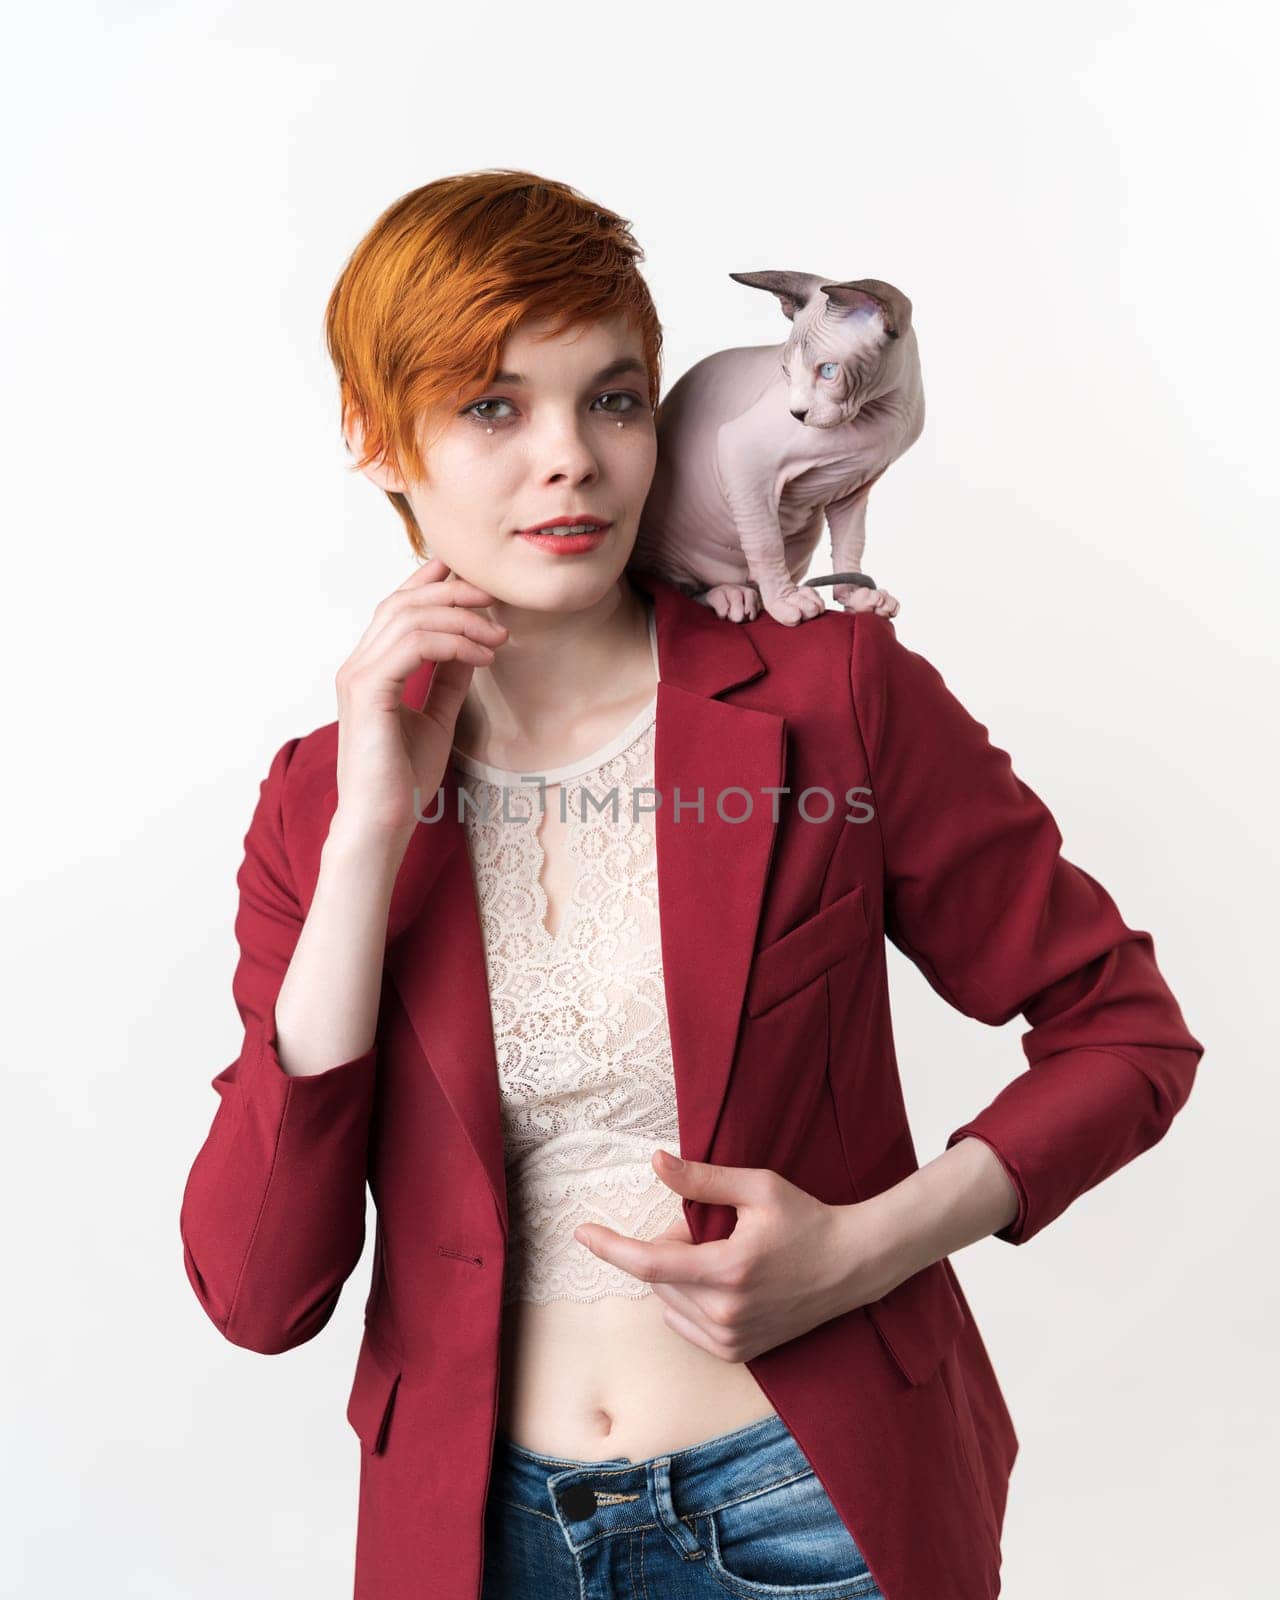 Portrait of hipster redhead young woman with short hair, dressed in red jacket, blue jeans and playful Sphynx Cat sitting on her shoulder. Front view studio shot on white background. Part of series